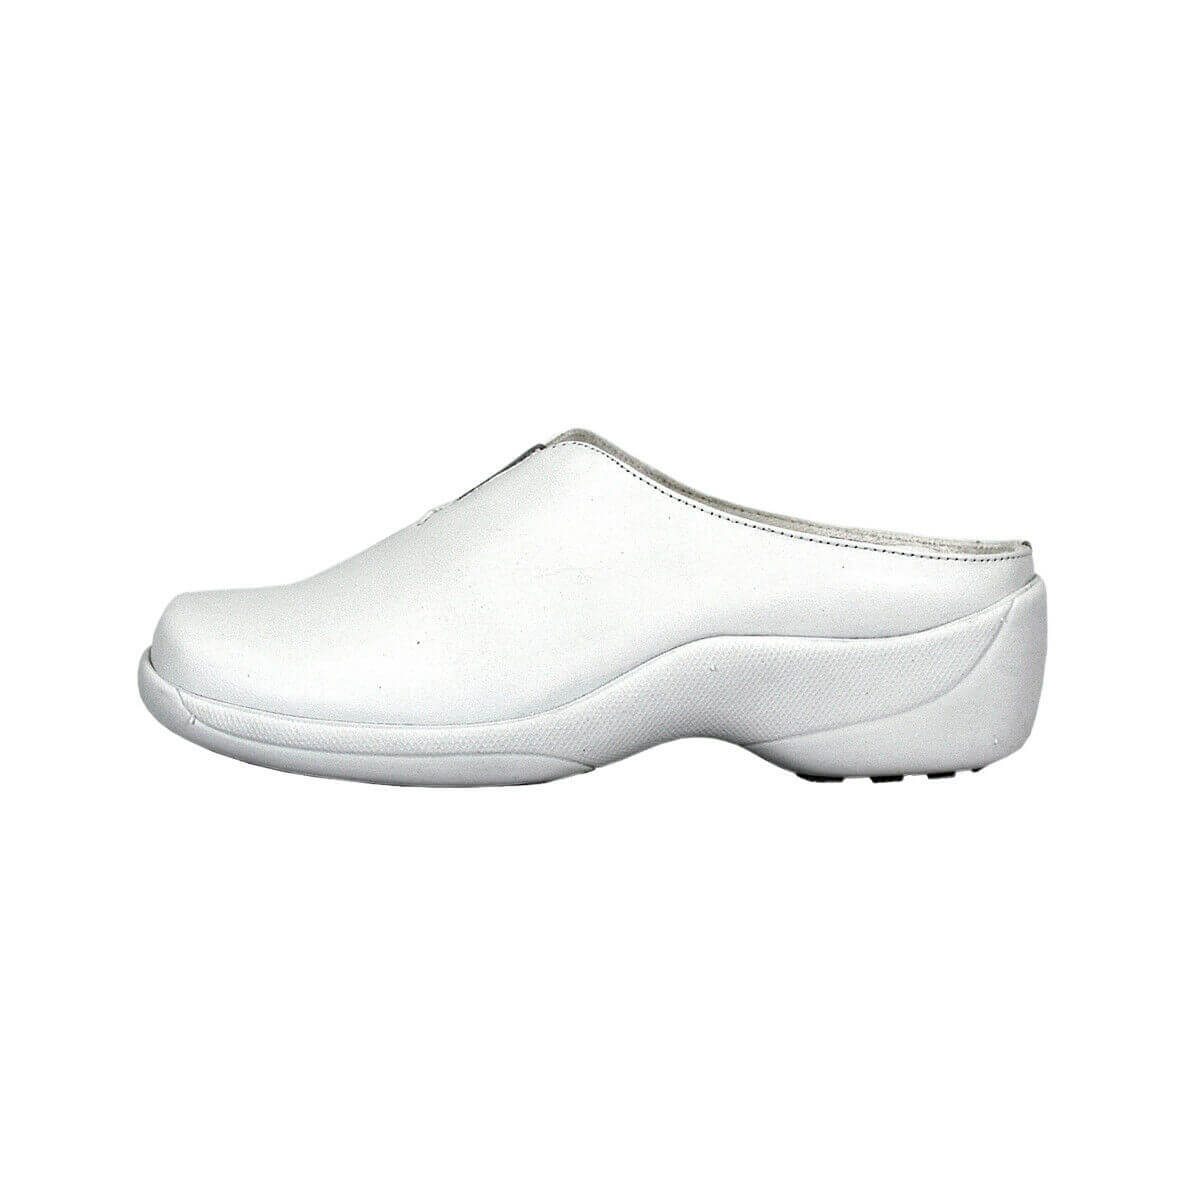 24 HOUR COMFORT Isabella Women's Wide Width Leather Clogs